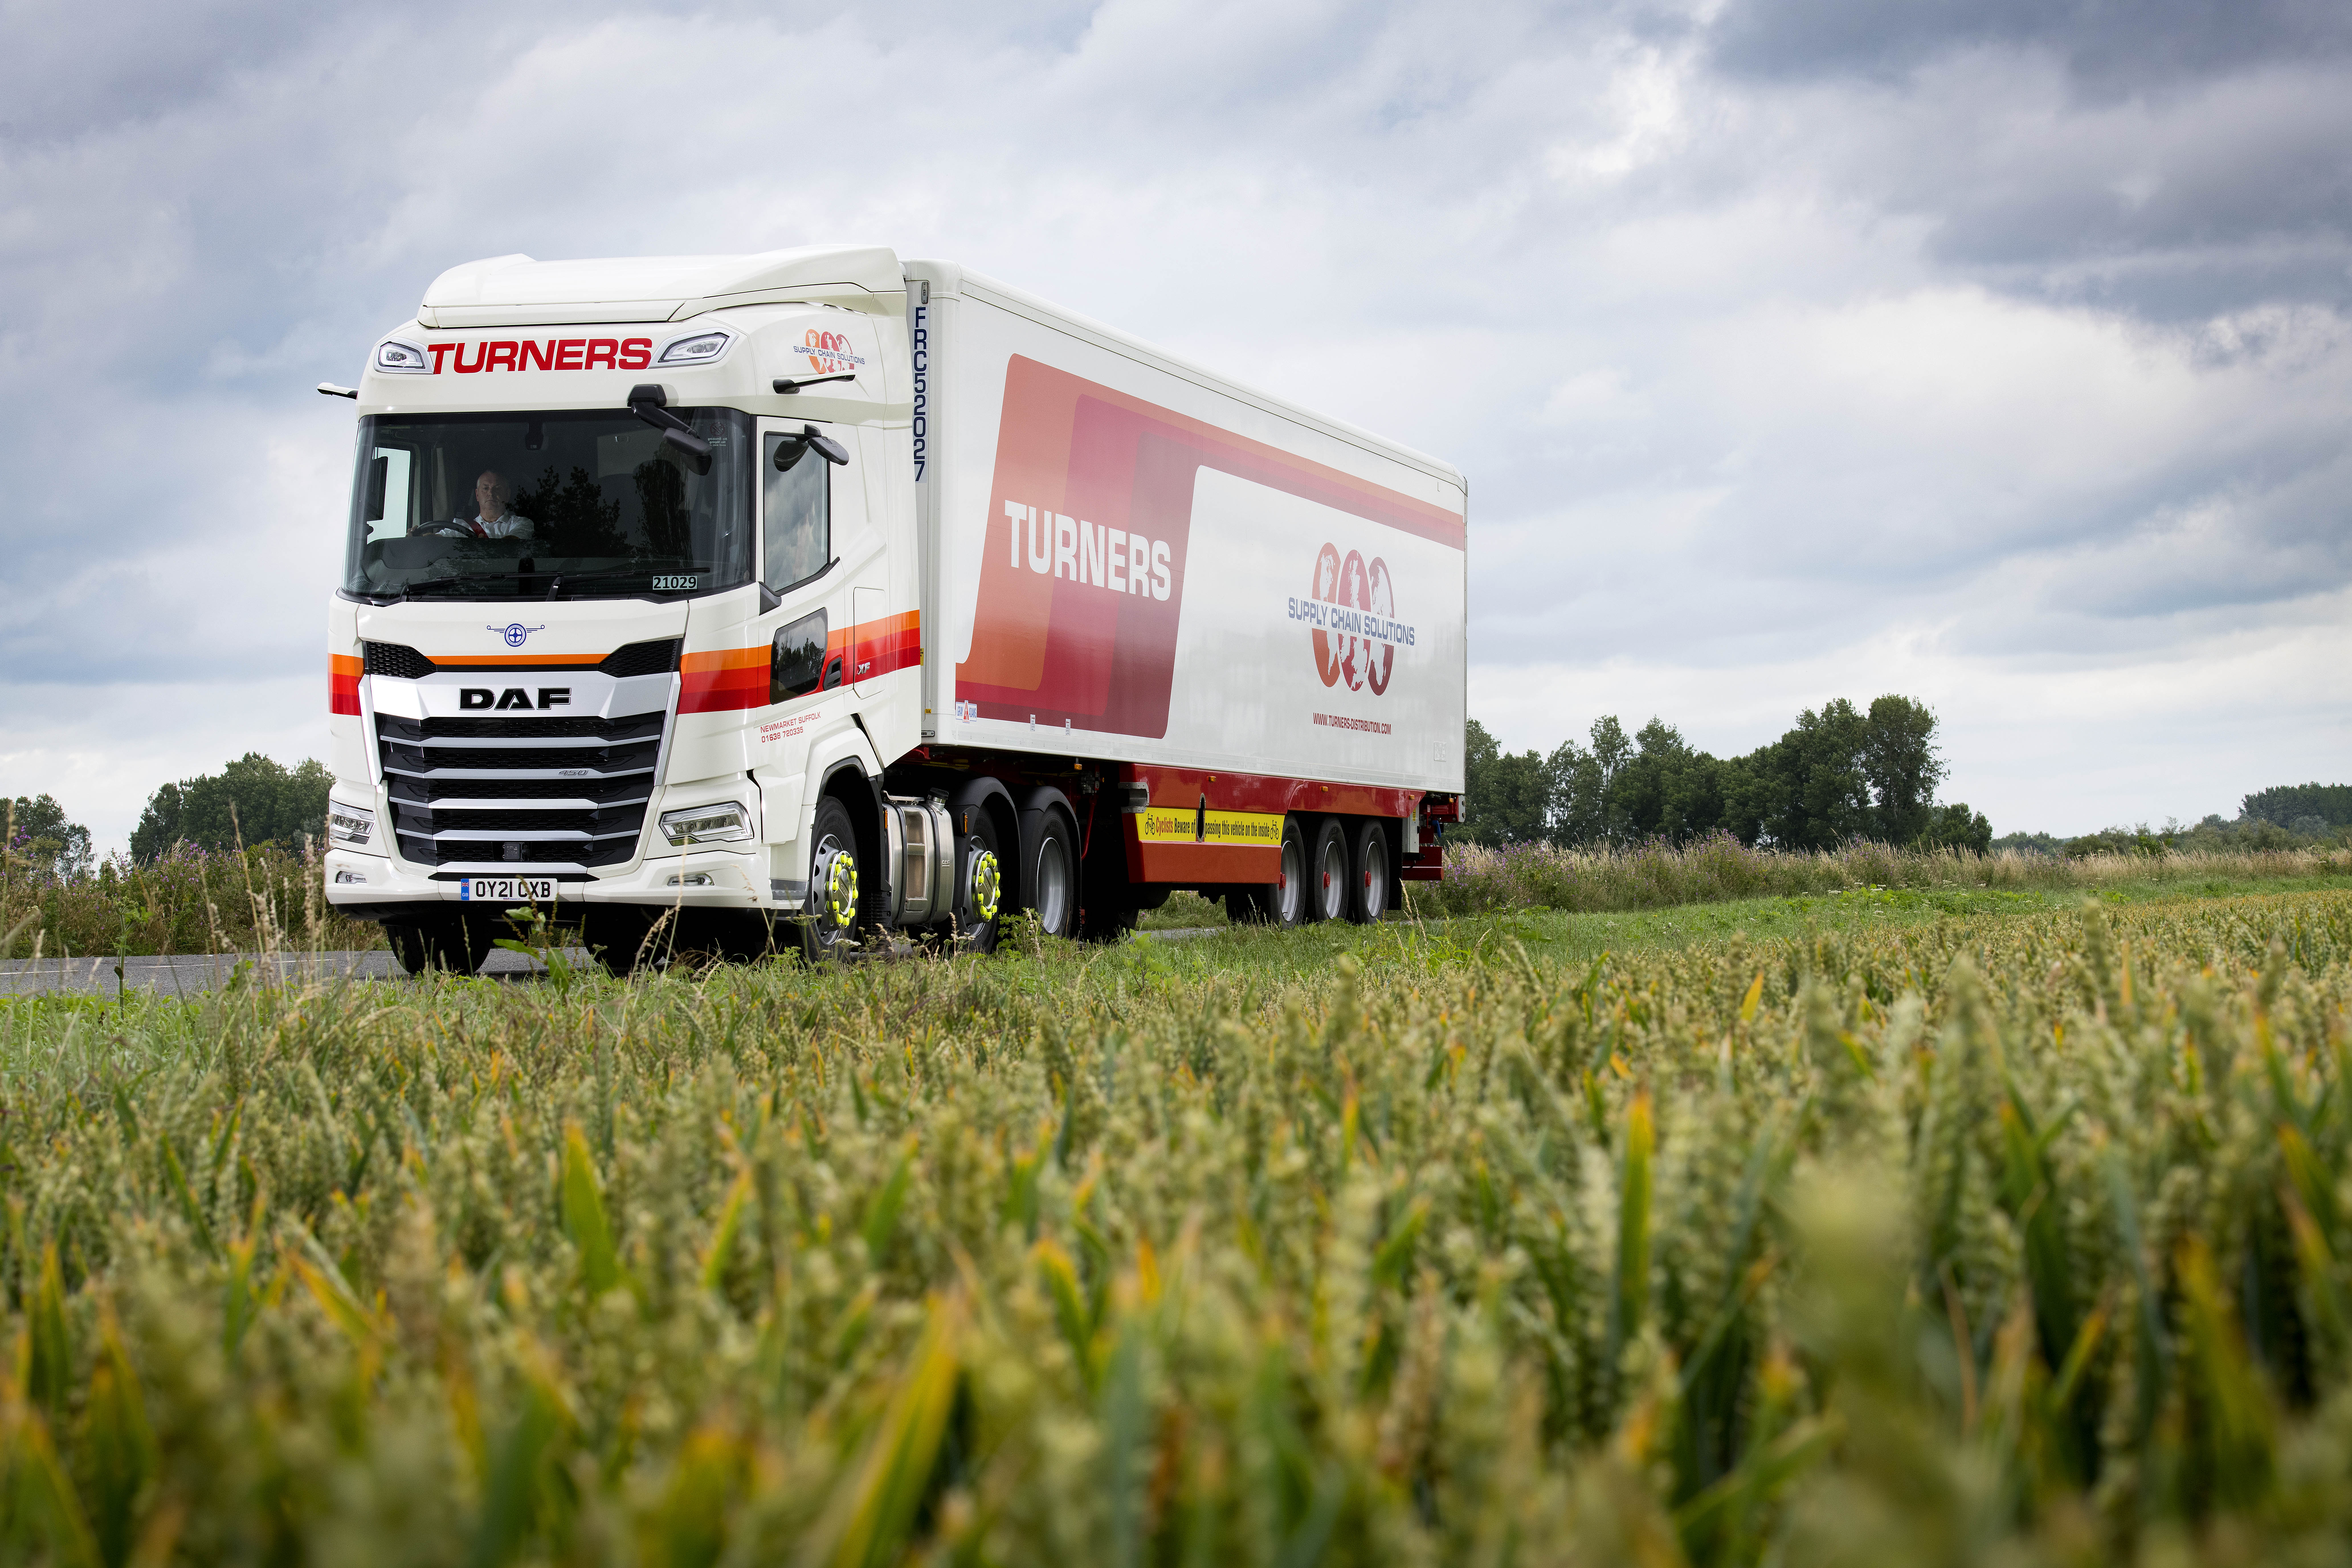 Turners tops 1,000 DAF three-axle ‘FTP’ tractor unit deliveries